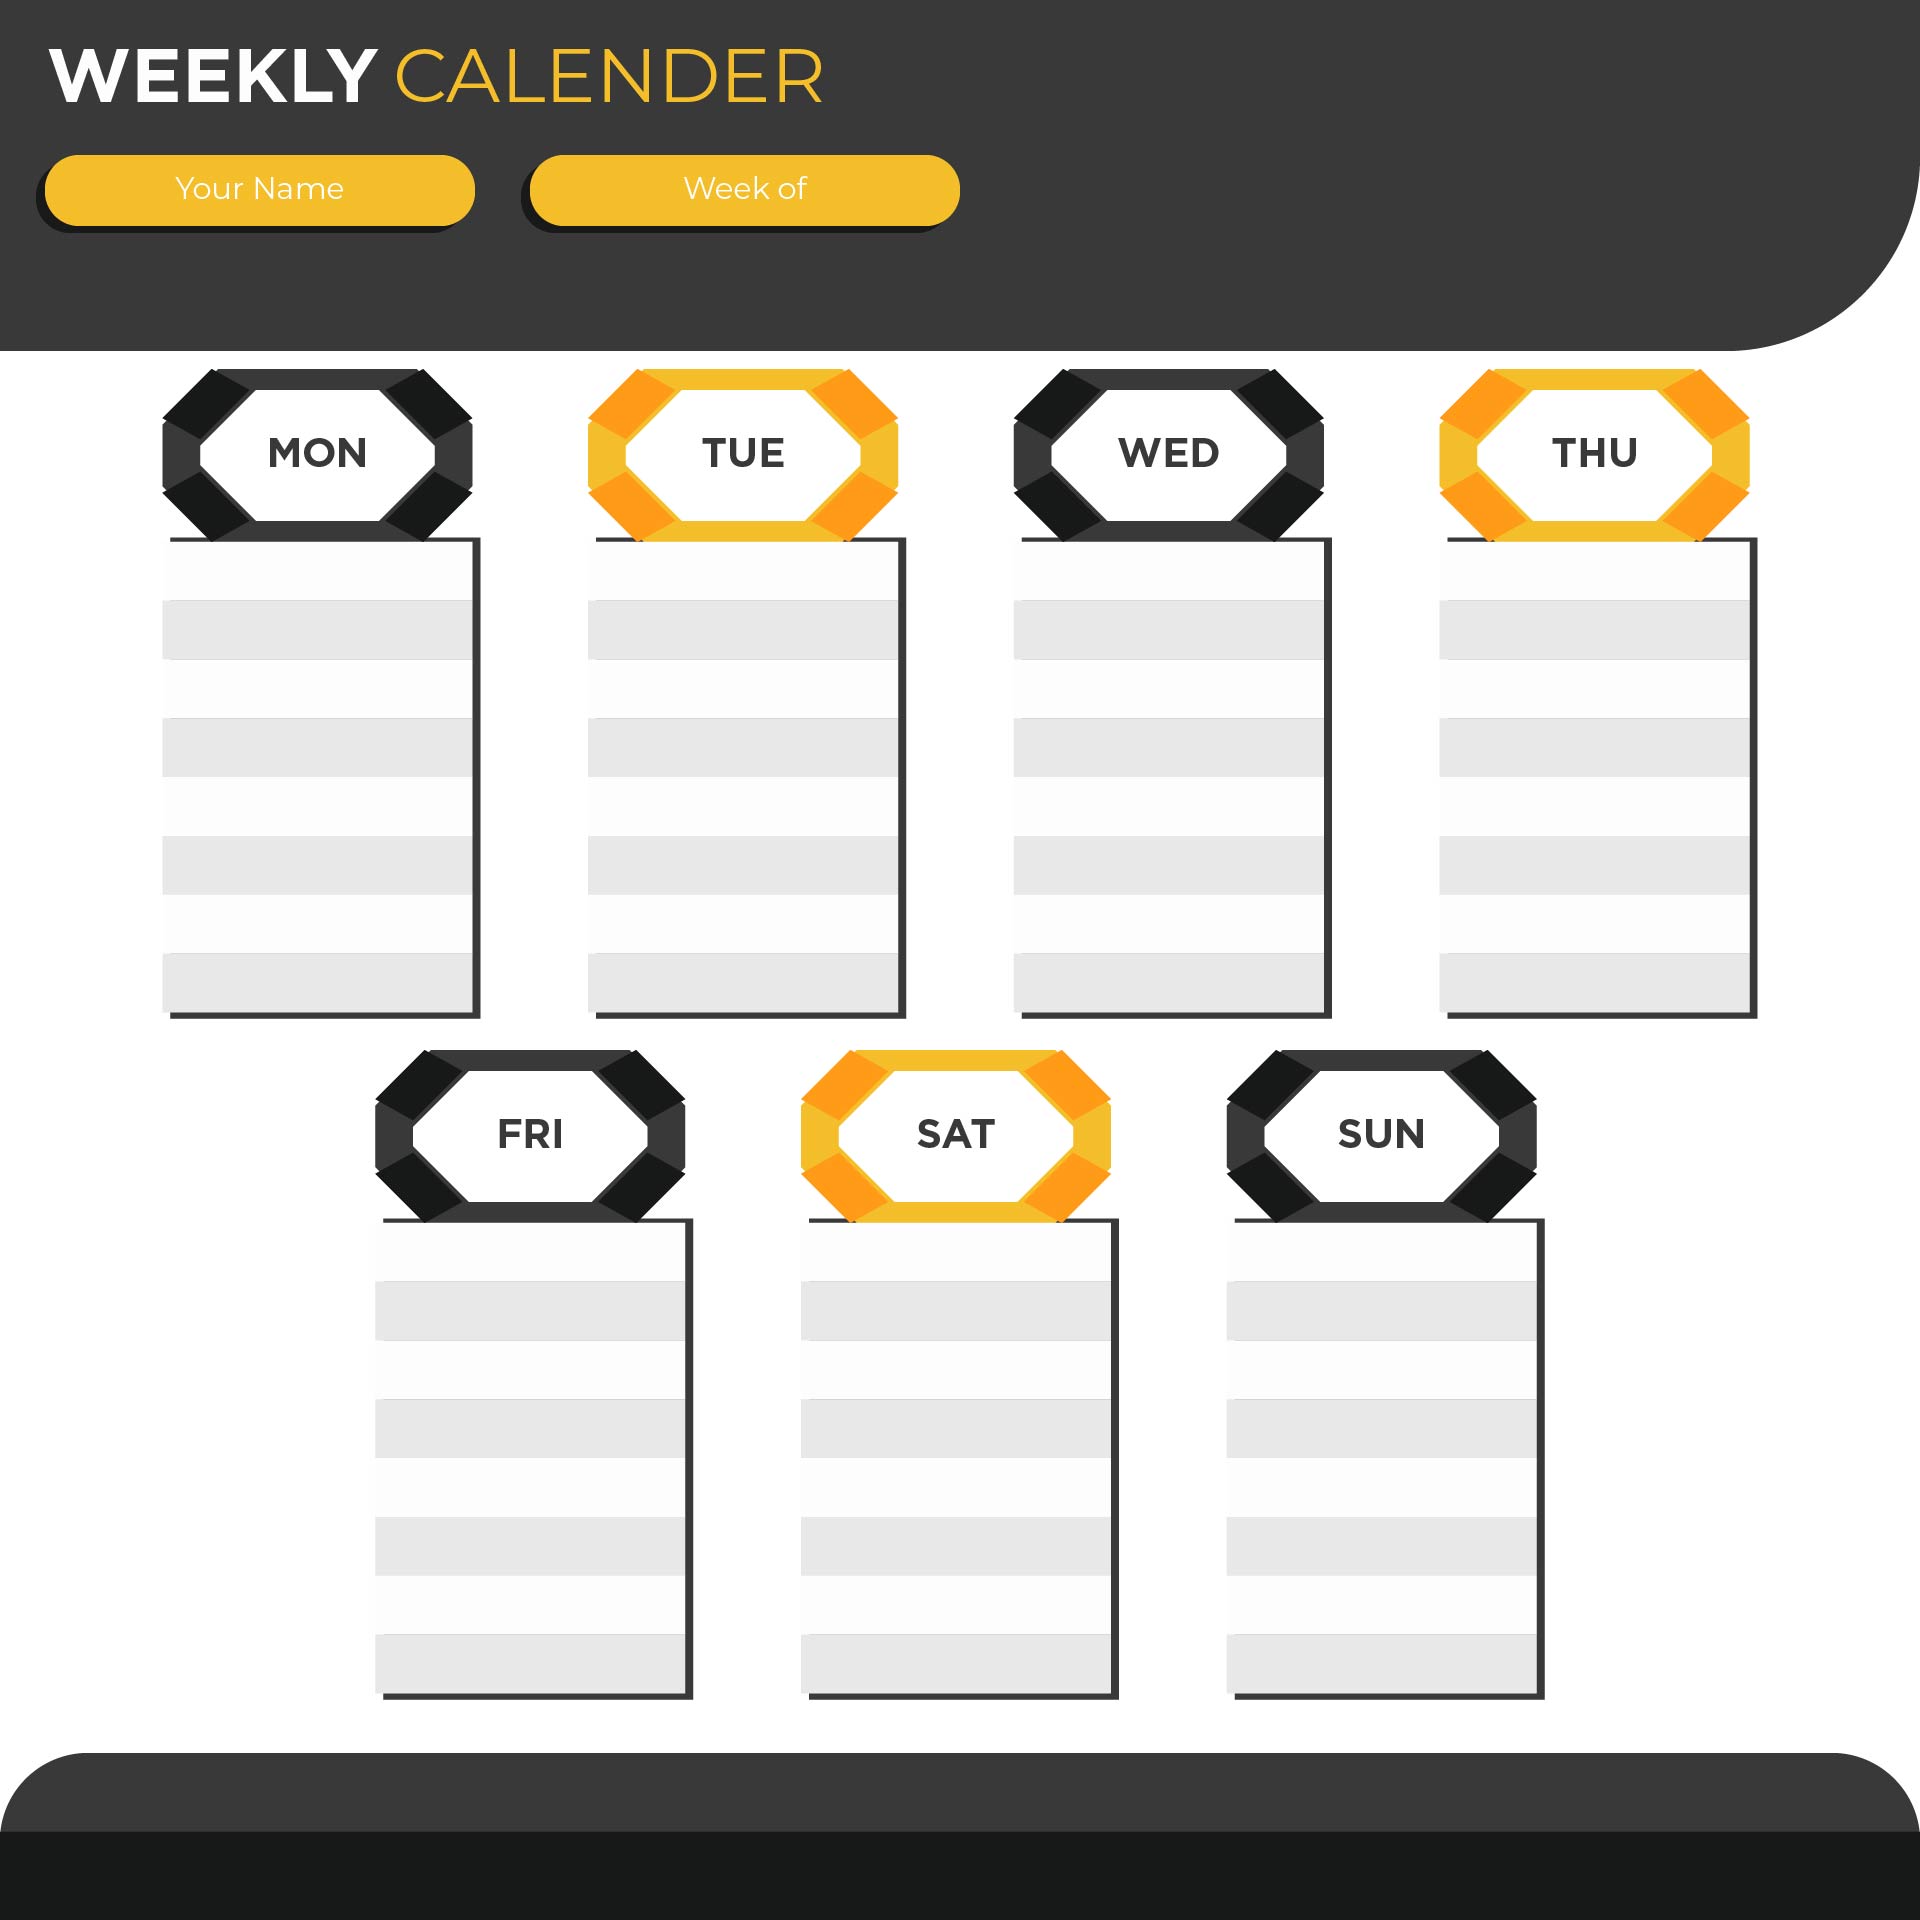 weekly calendar template with time slots 29